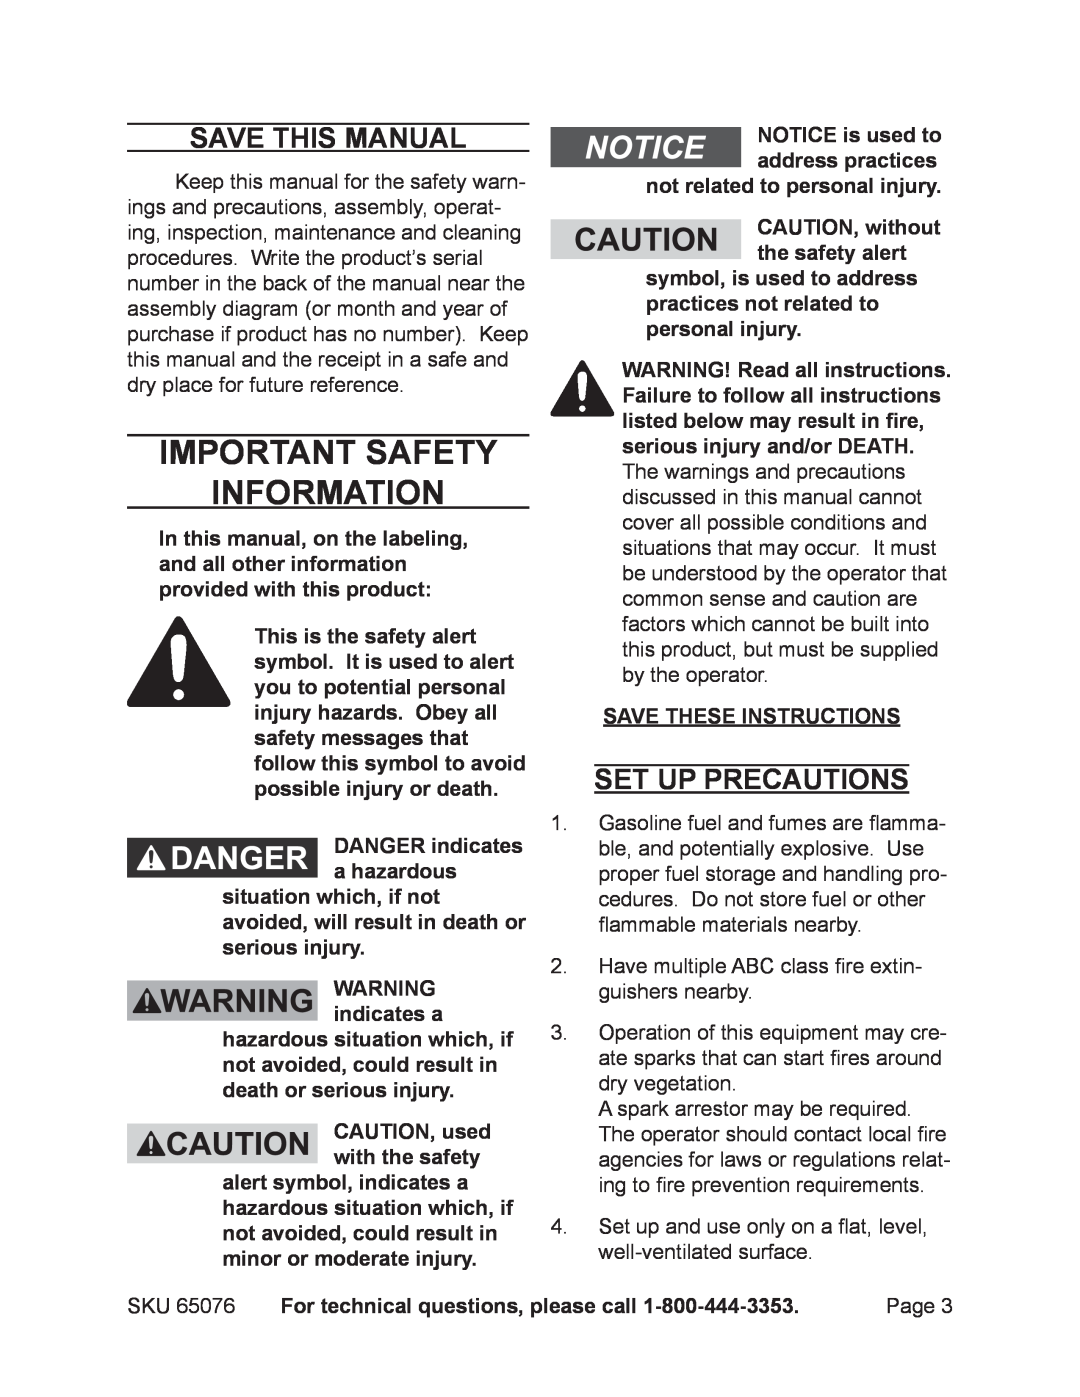 Harbor Freight Tools 65076 manual Important SAFETY Information, Save This Manual, Set up precautions, WARNING indicates a 